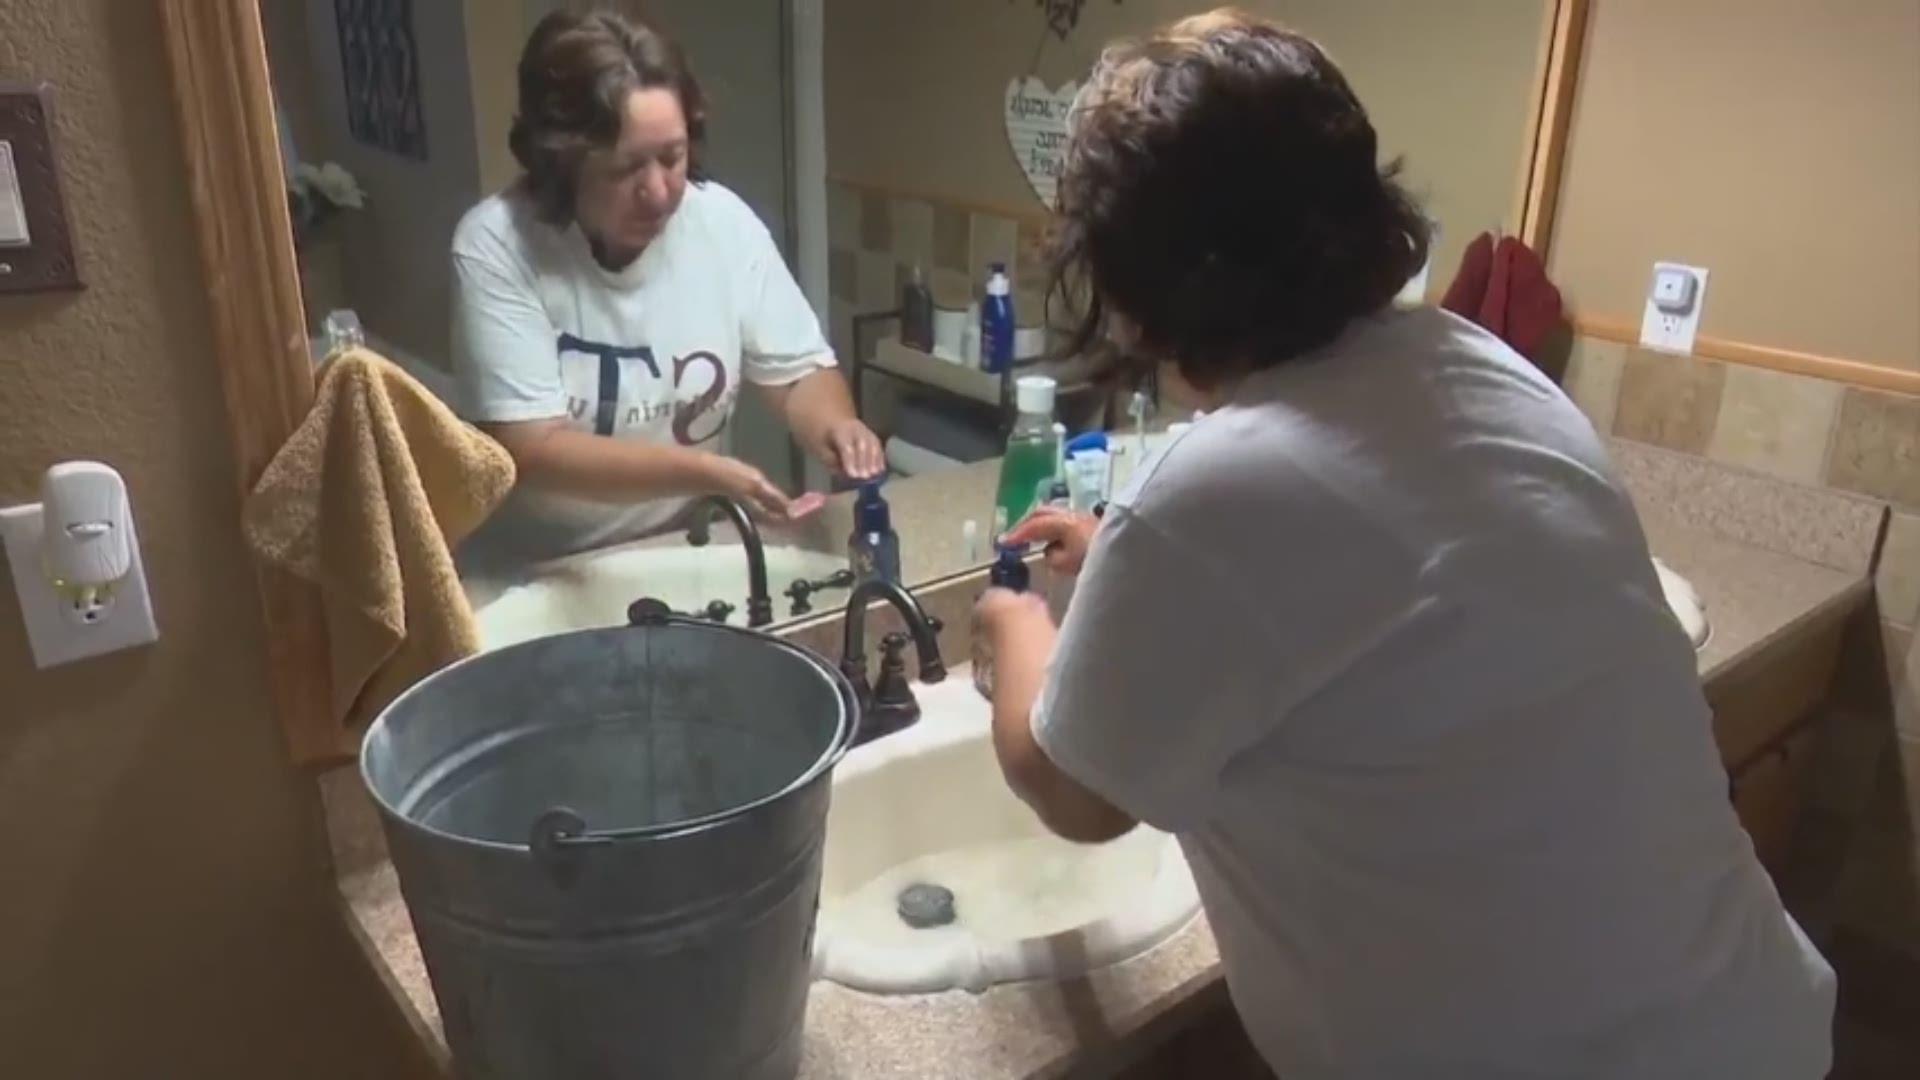 What happened in Ferris, Texas this weekend? Residents are without water — and they say it's not the first time this has happened in recent months.